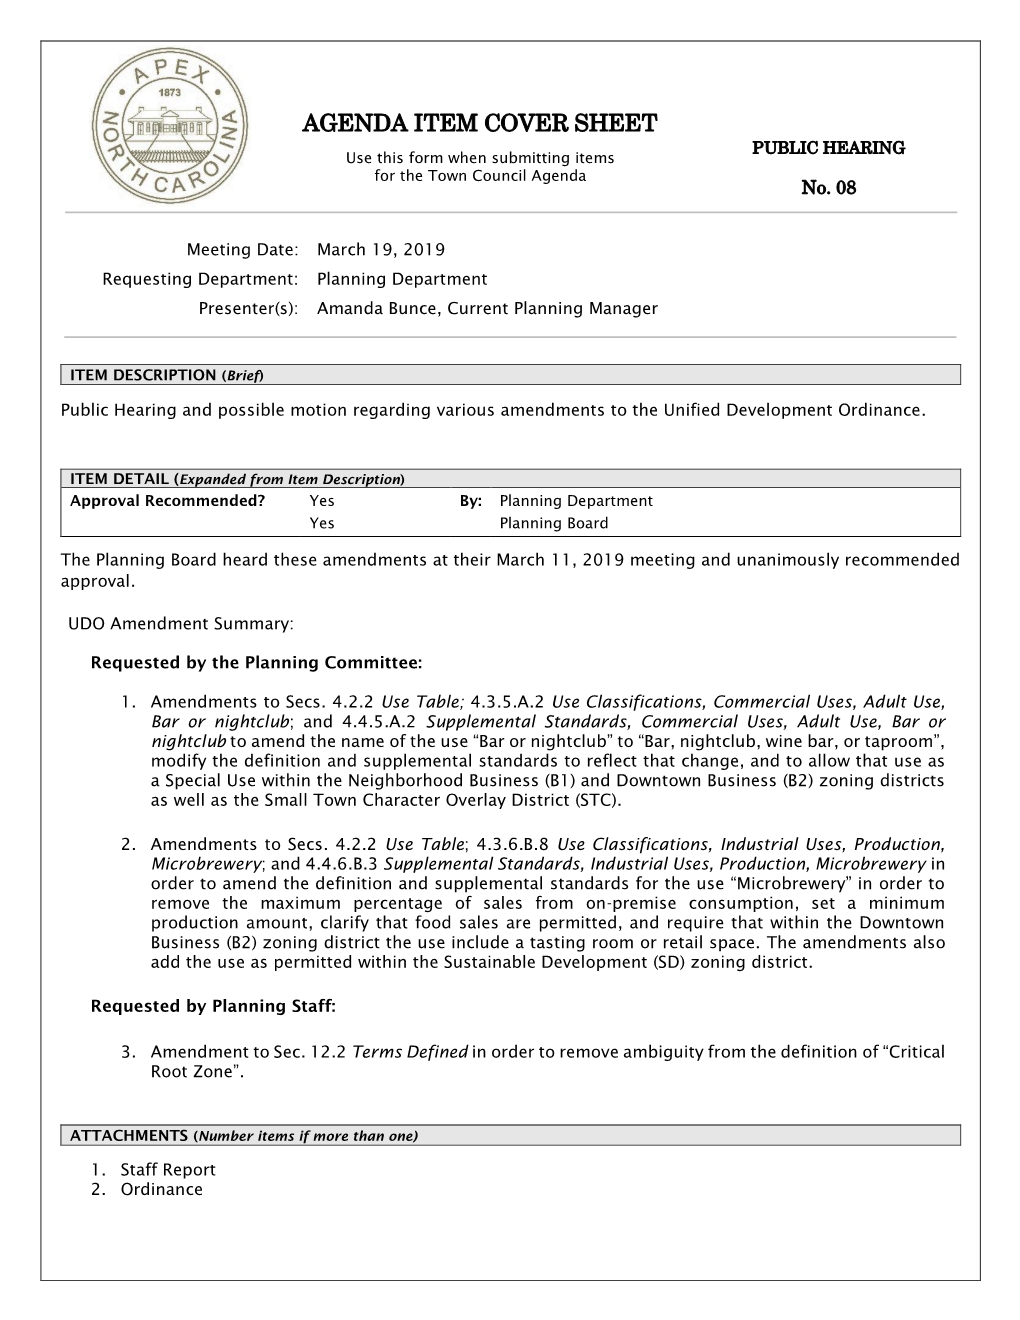 AGENDA ITEM COVER SHEET PUBLIC HEARING Use This Form When Submitting Items for the Town Council Agenda No